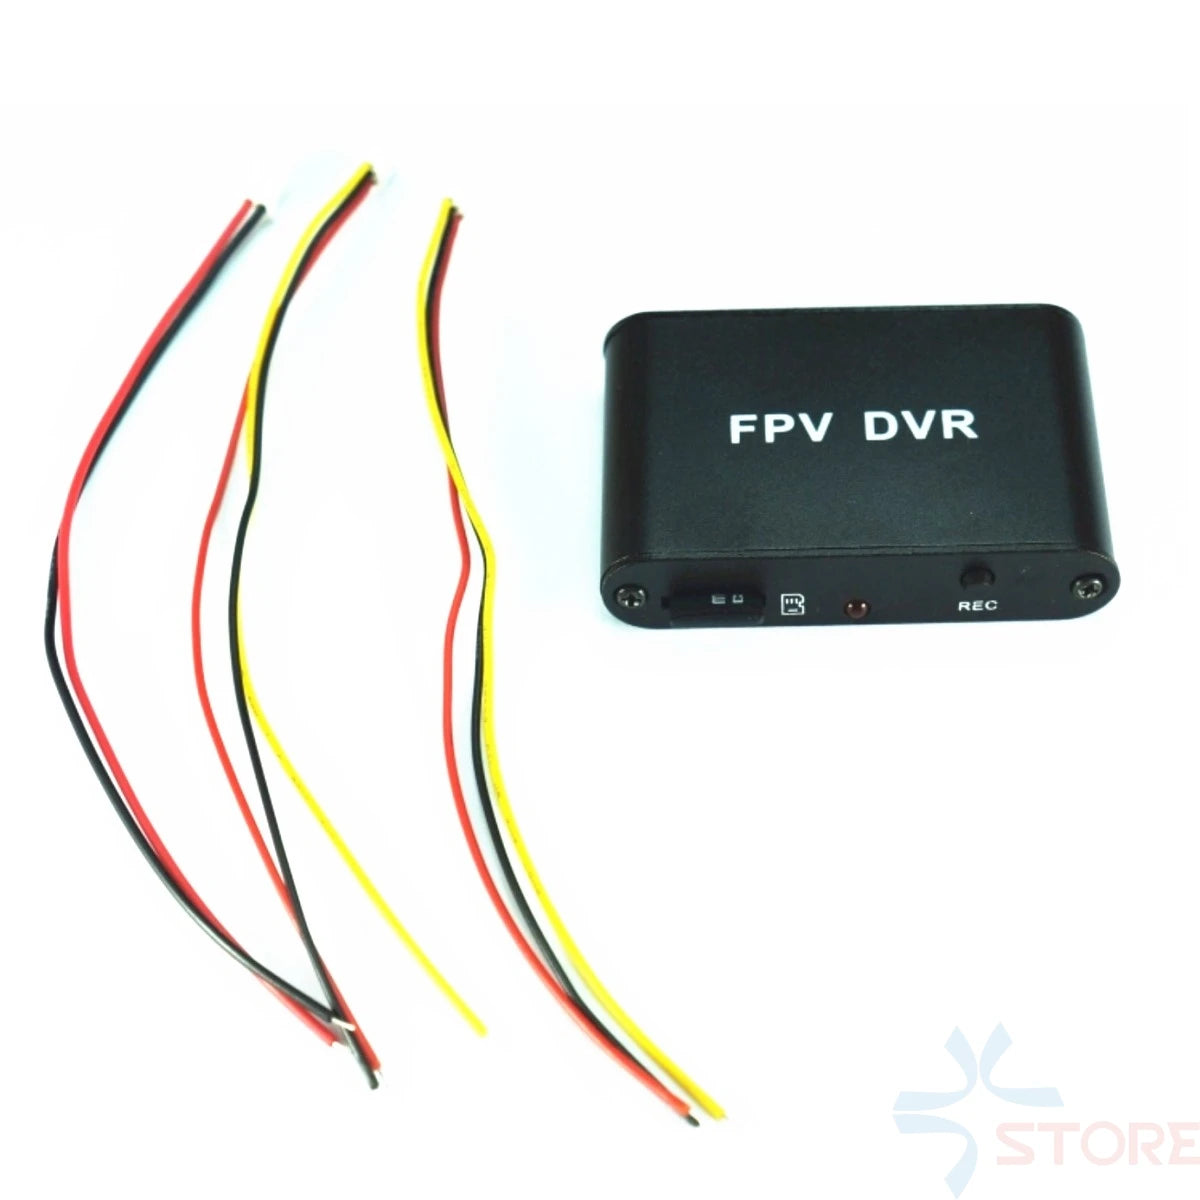 FPV DVR SPECIFICATIONS Use : Vehicles & Remote